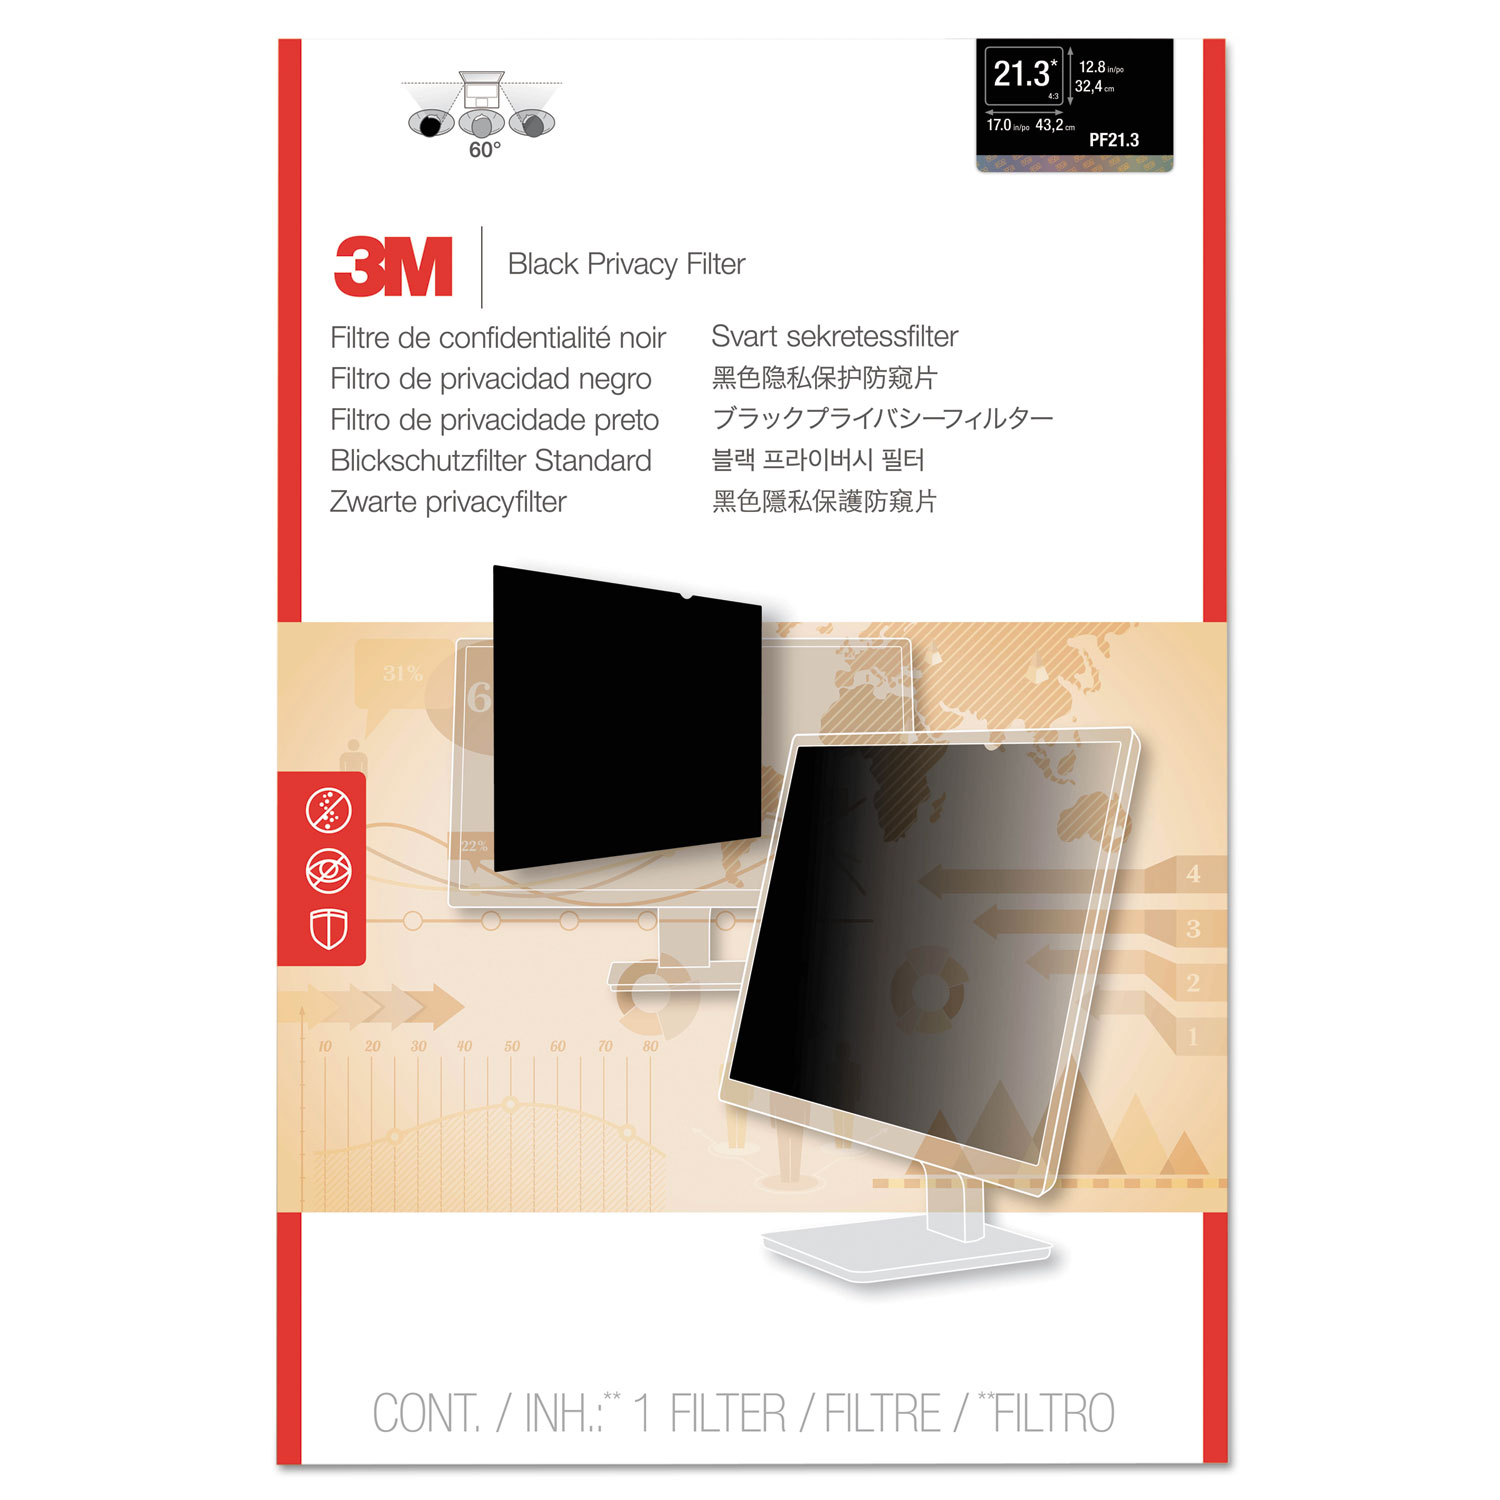 3M, MMMPF213C3B, Privacy Filter for 21.3 in Monitors 4:3 PF213C3B, Black,Glossy,Matte - image 2 of 3